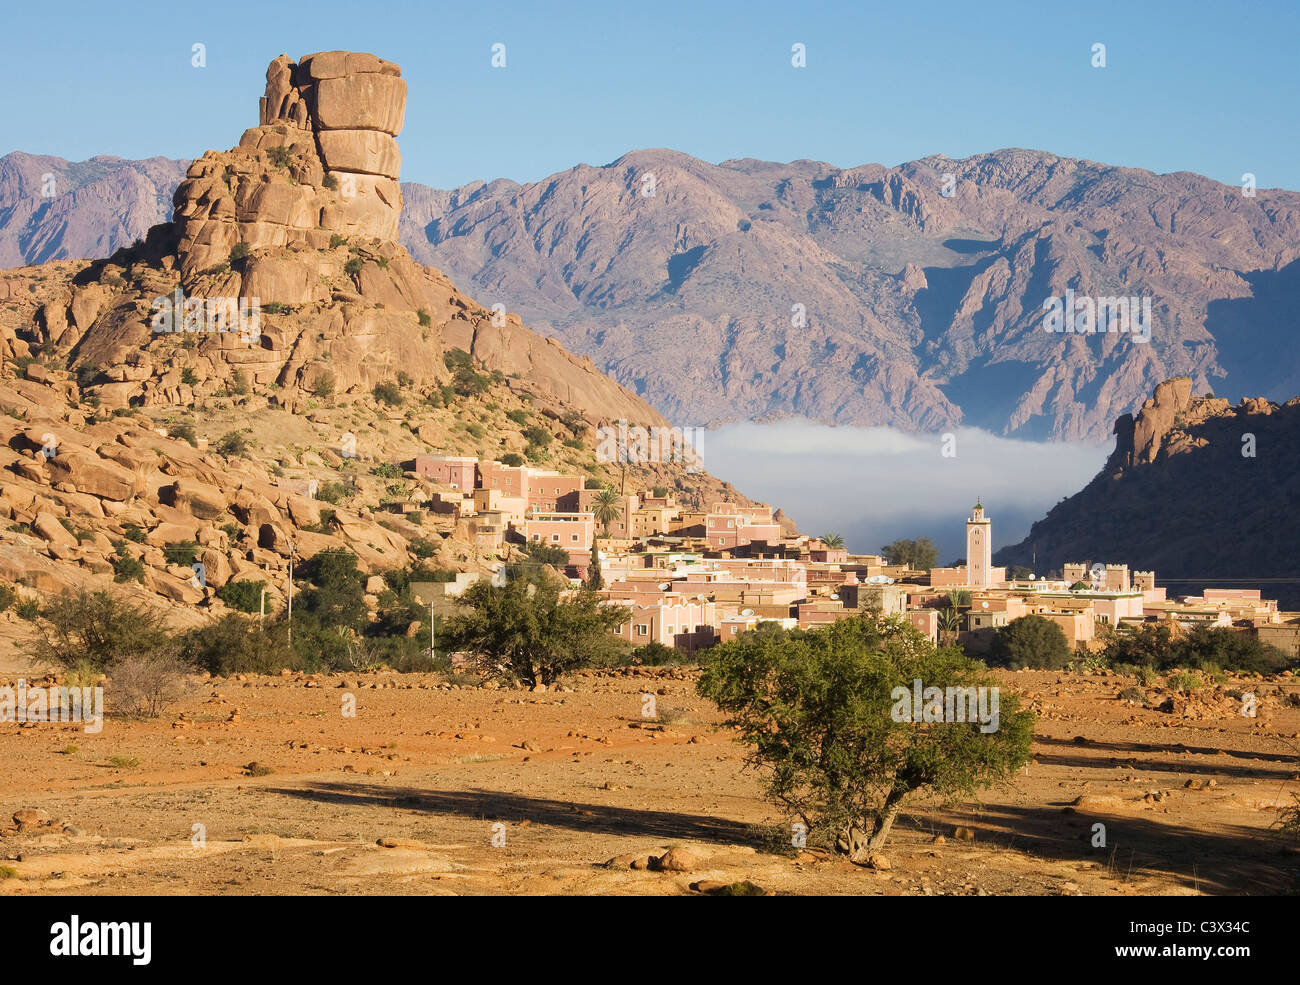 The village of Aguard Oudad at the foot of the famous rock formation Chapeau  de Napoleon (Napoleons hat). Morocco Stock Photo - Alamy